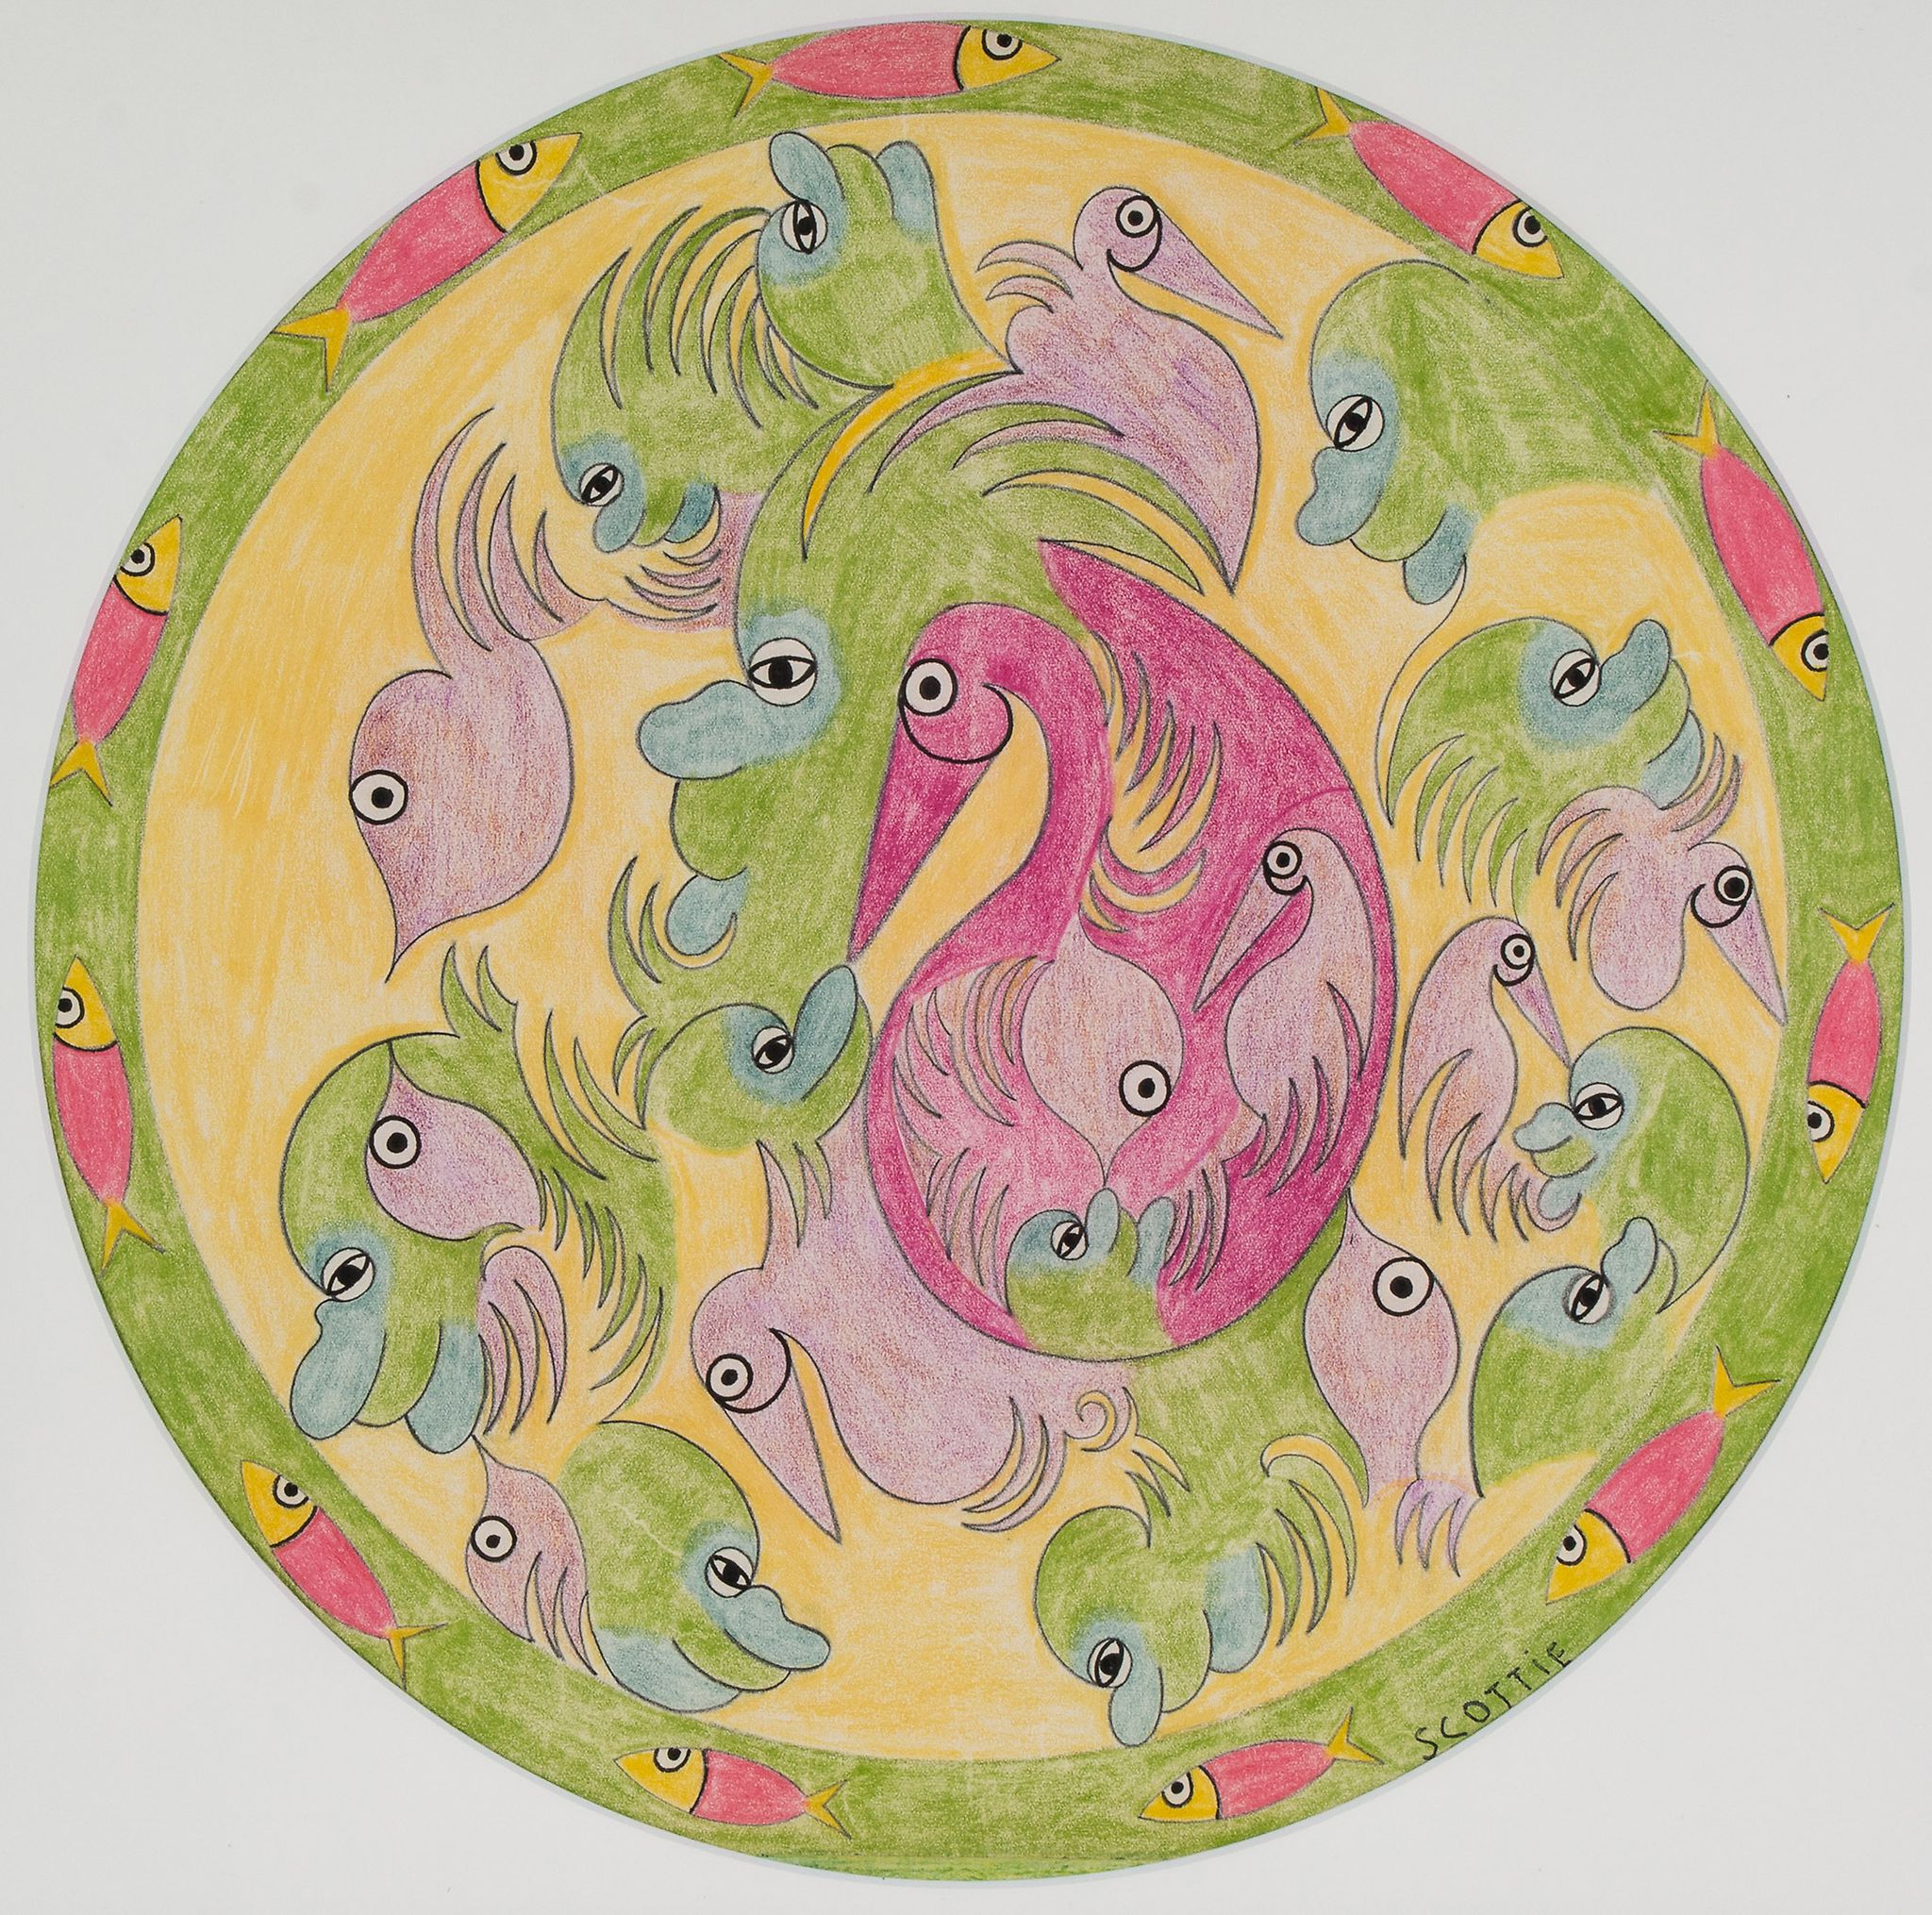 Scottie Wilson (1889-1972) - Untitled (Circular abstract design) pencil and coloured crayon,